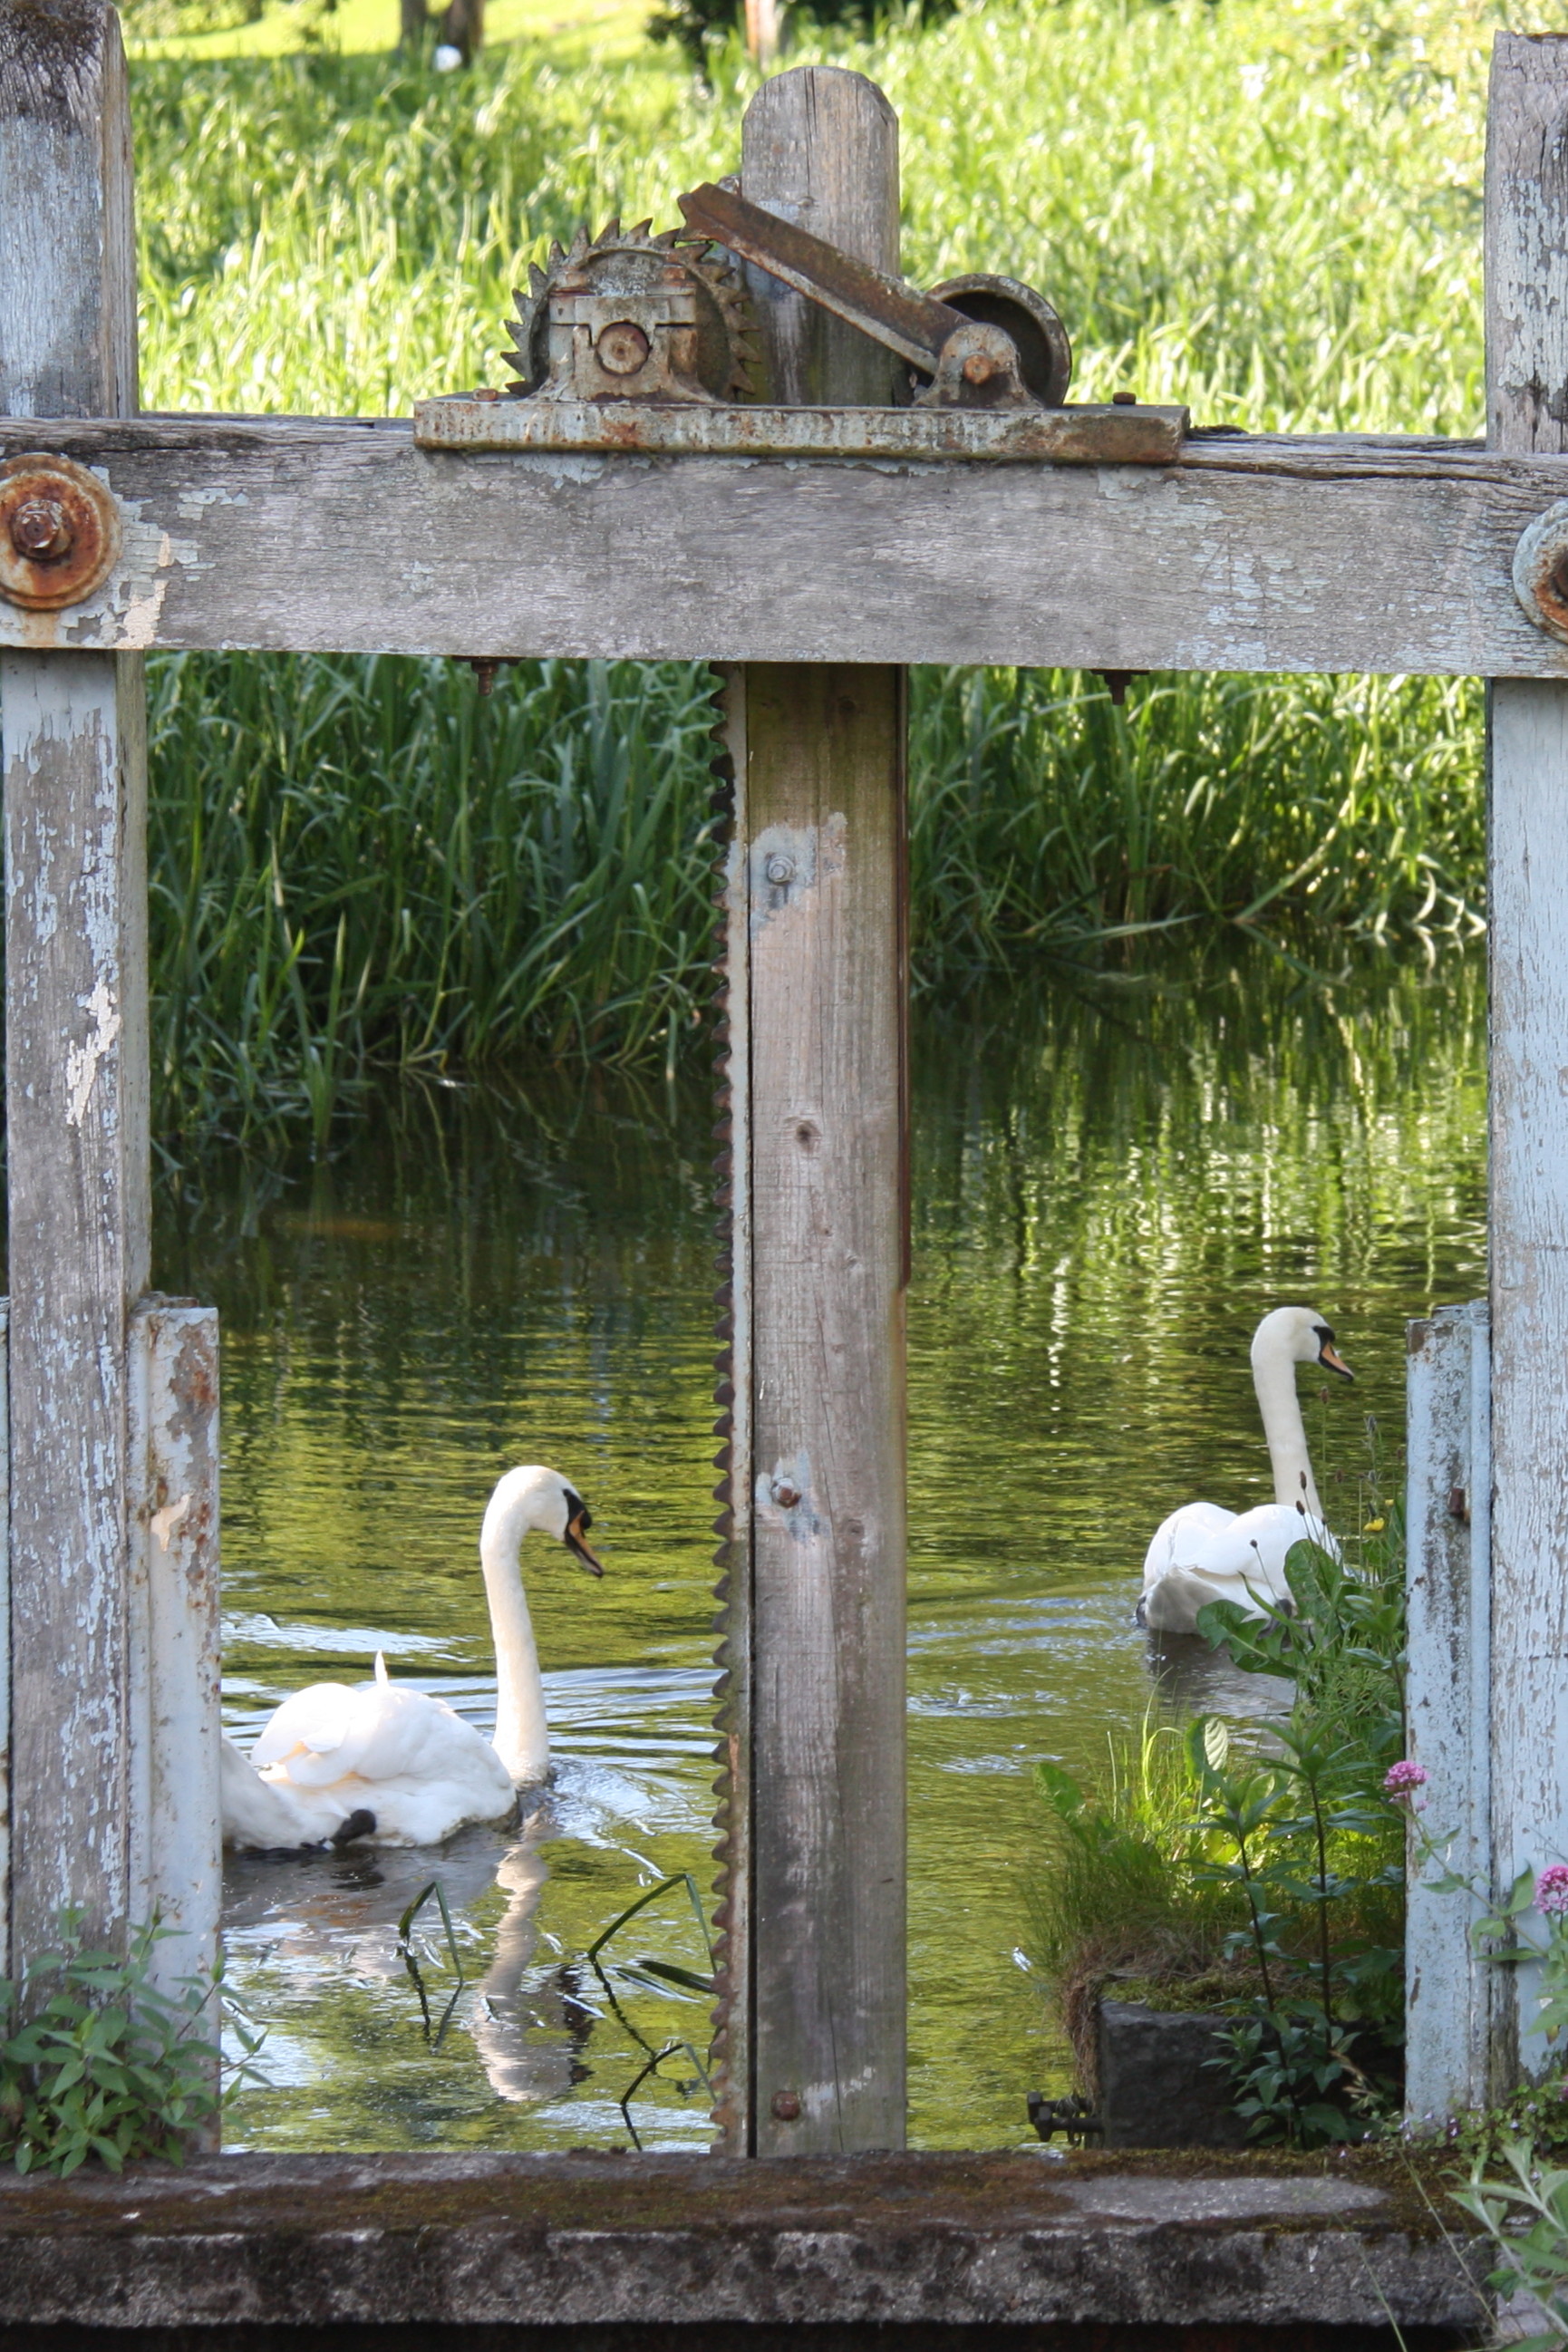 Two swans on body of water near tall green grass on bright day with metal and wood frame in the foreground